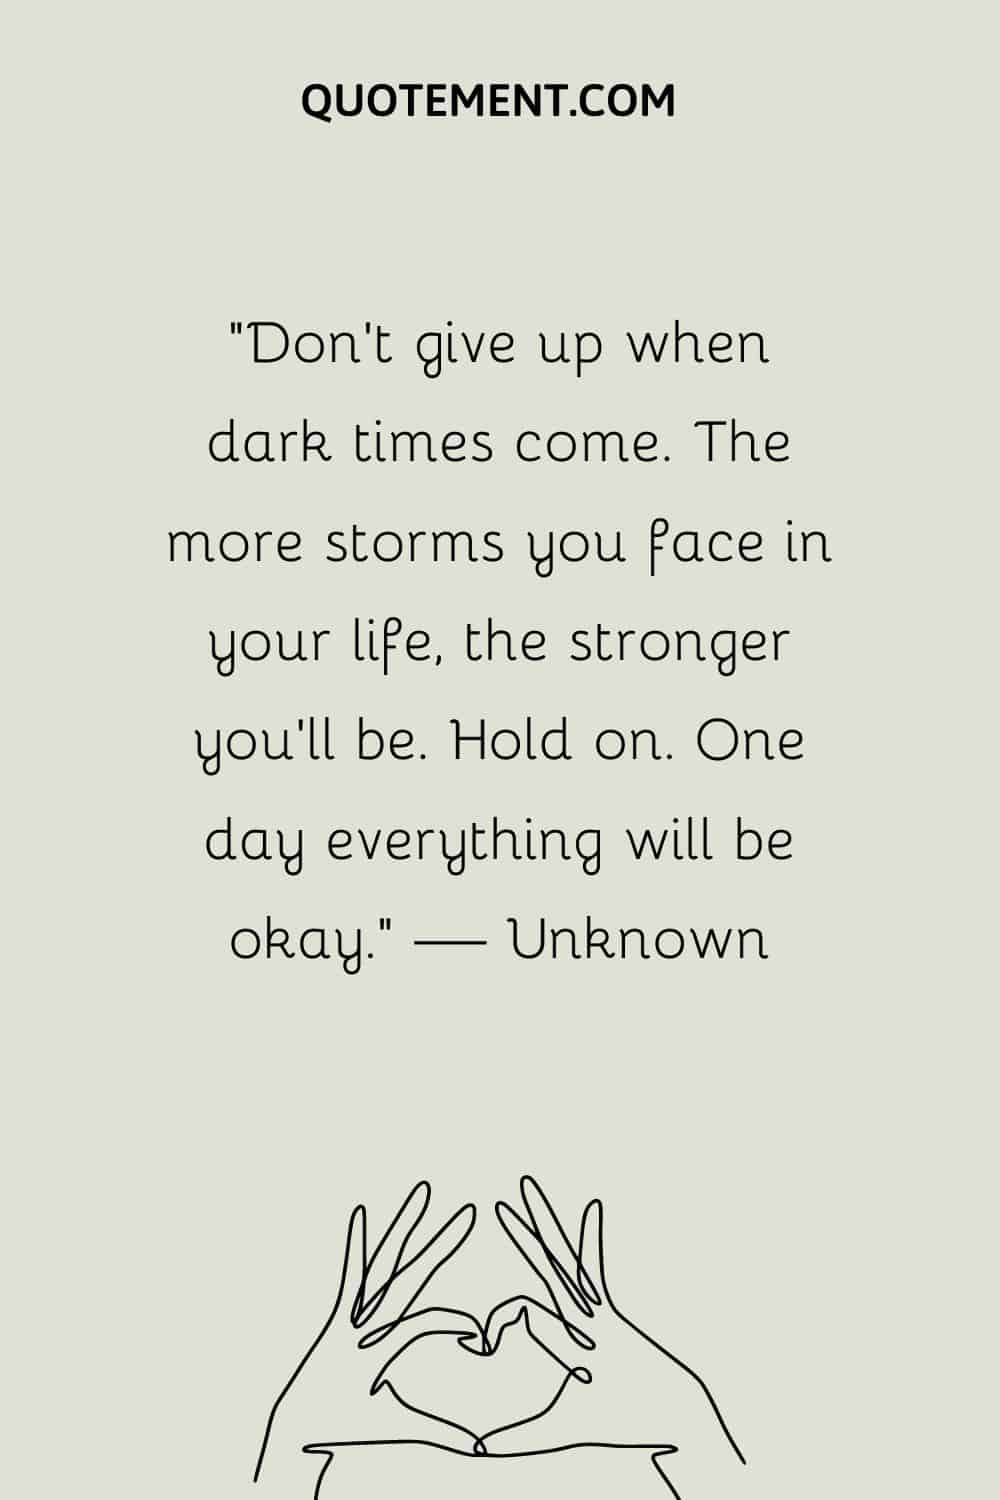 “Don’t give up when dark times come. The more storms you face in your life, the stronger you’ll be. Hold on. One day everything will be okay.” — Unknown